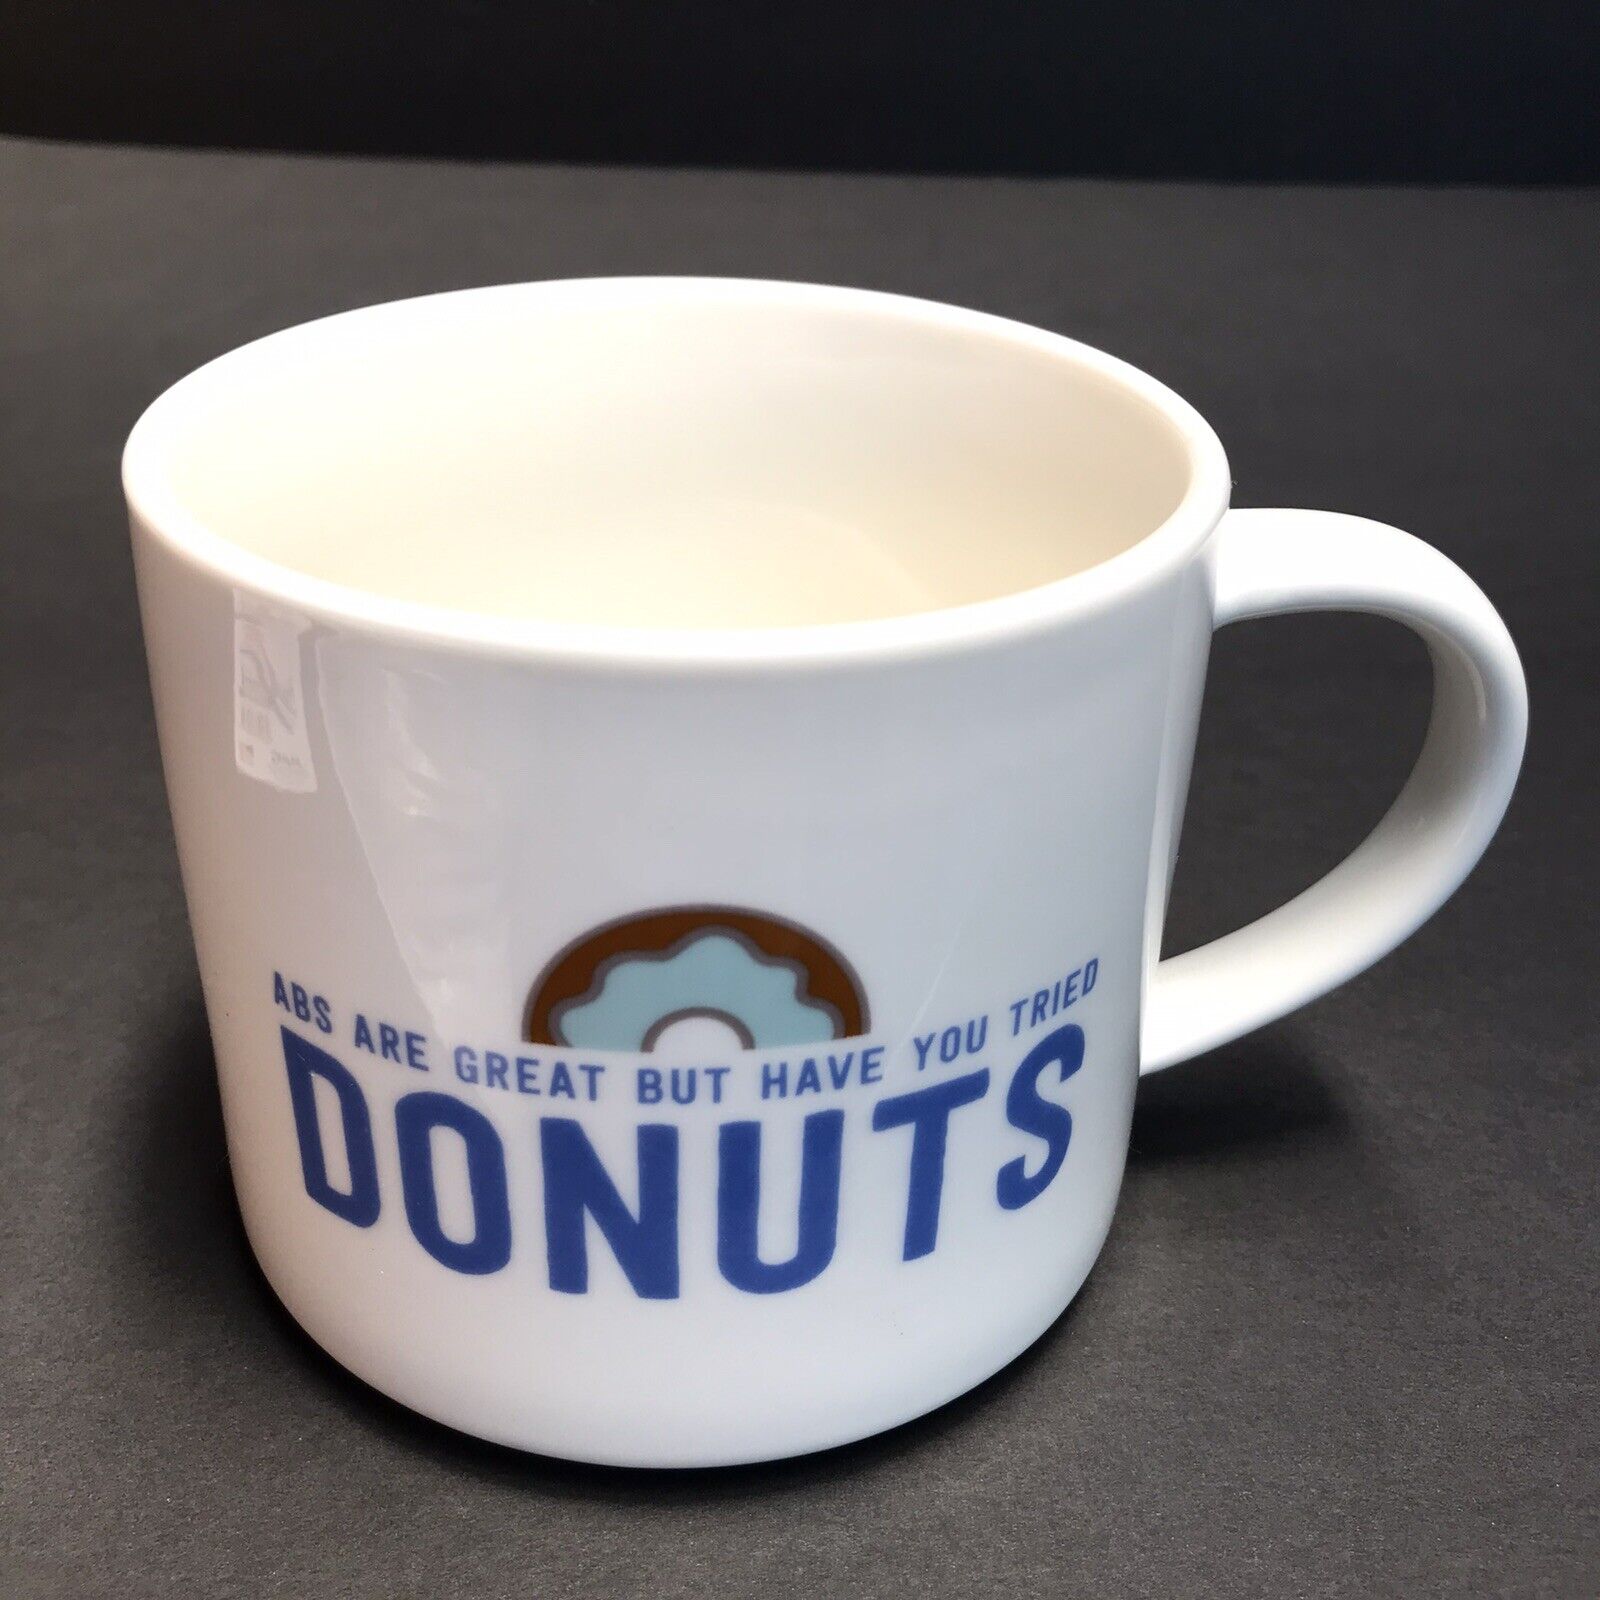 Room Essentials Abs Are Great But Have You Tried Donuts Coffee Mug Tea Cup NEW